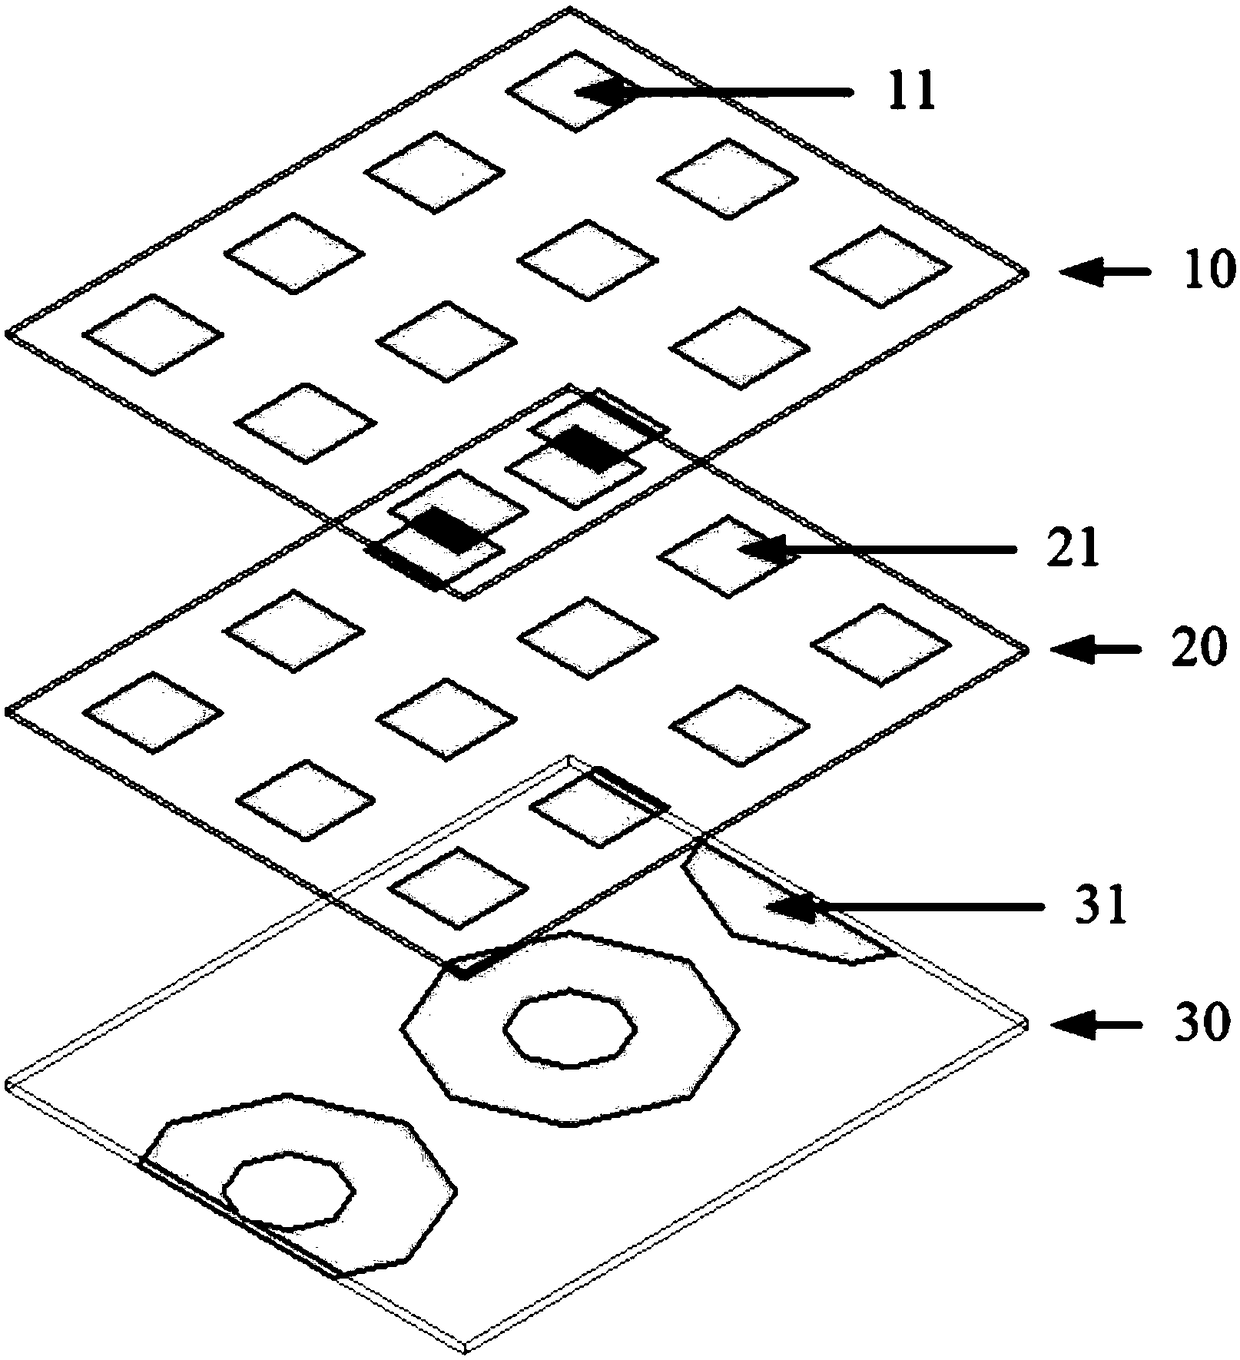 A wideband wide-angle scanning phased array antenna based on triangular grid arrangement